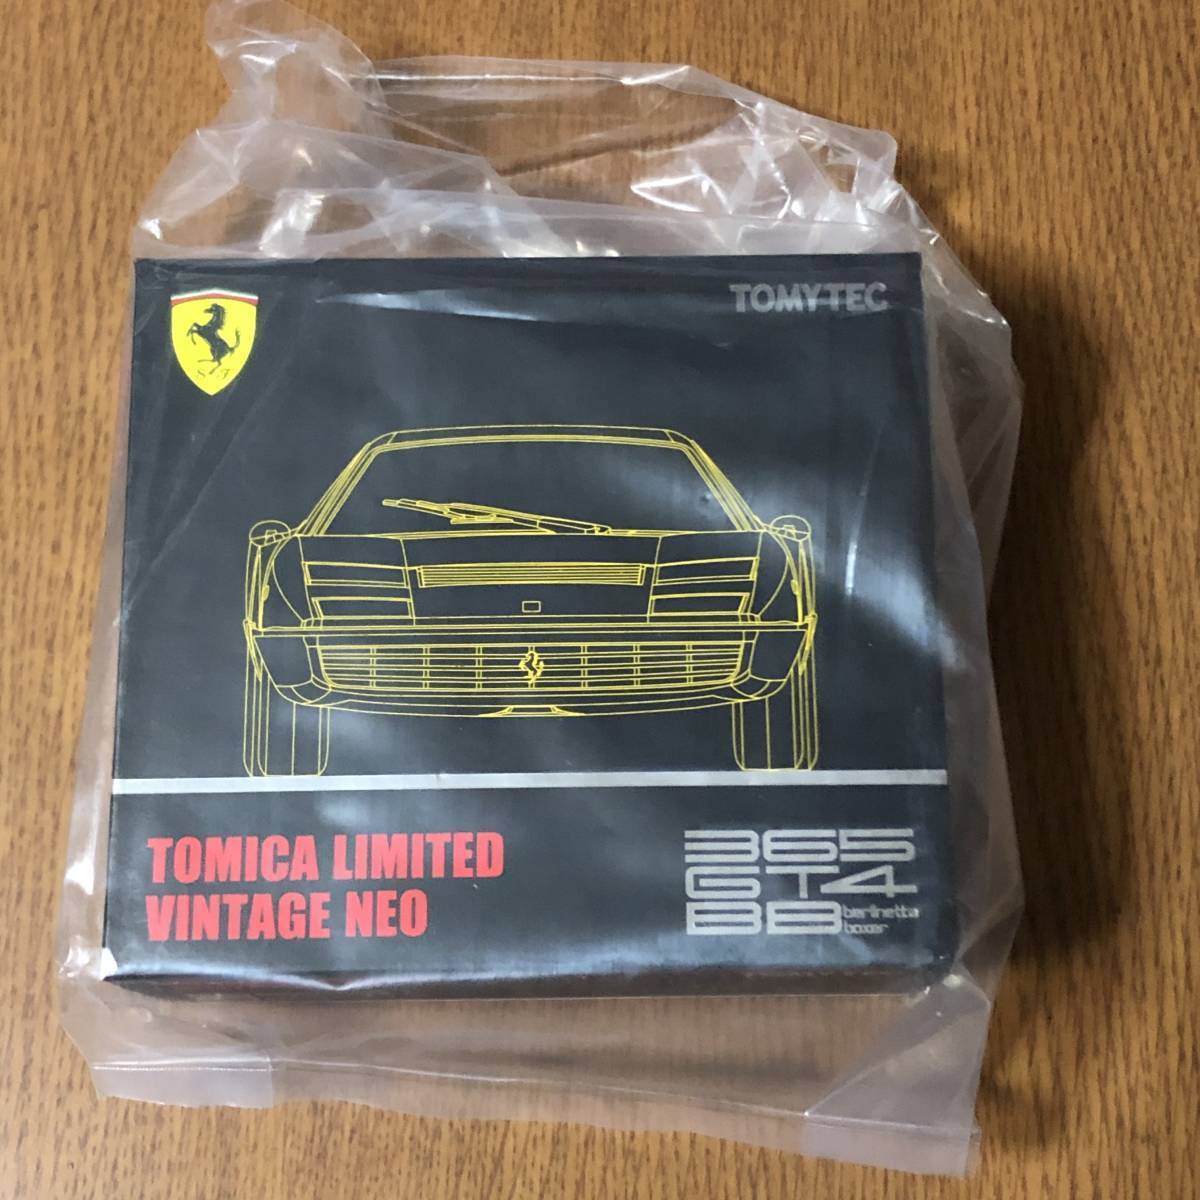 Tomica Limited Vintage Neo Takara Tomy Mall Limited LV NEO Ferrari 365 GT4